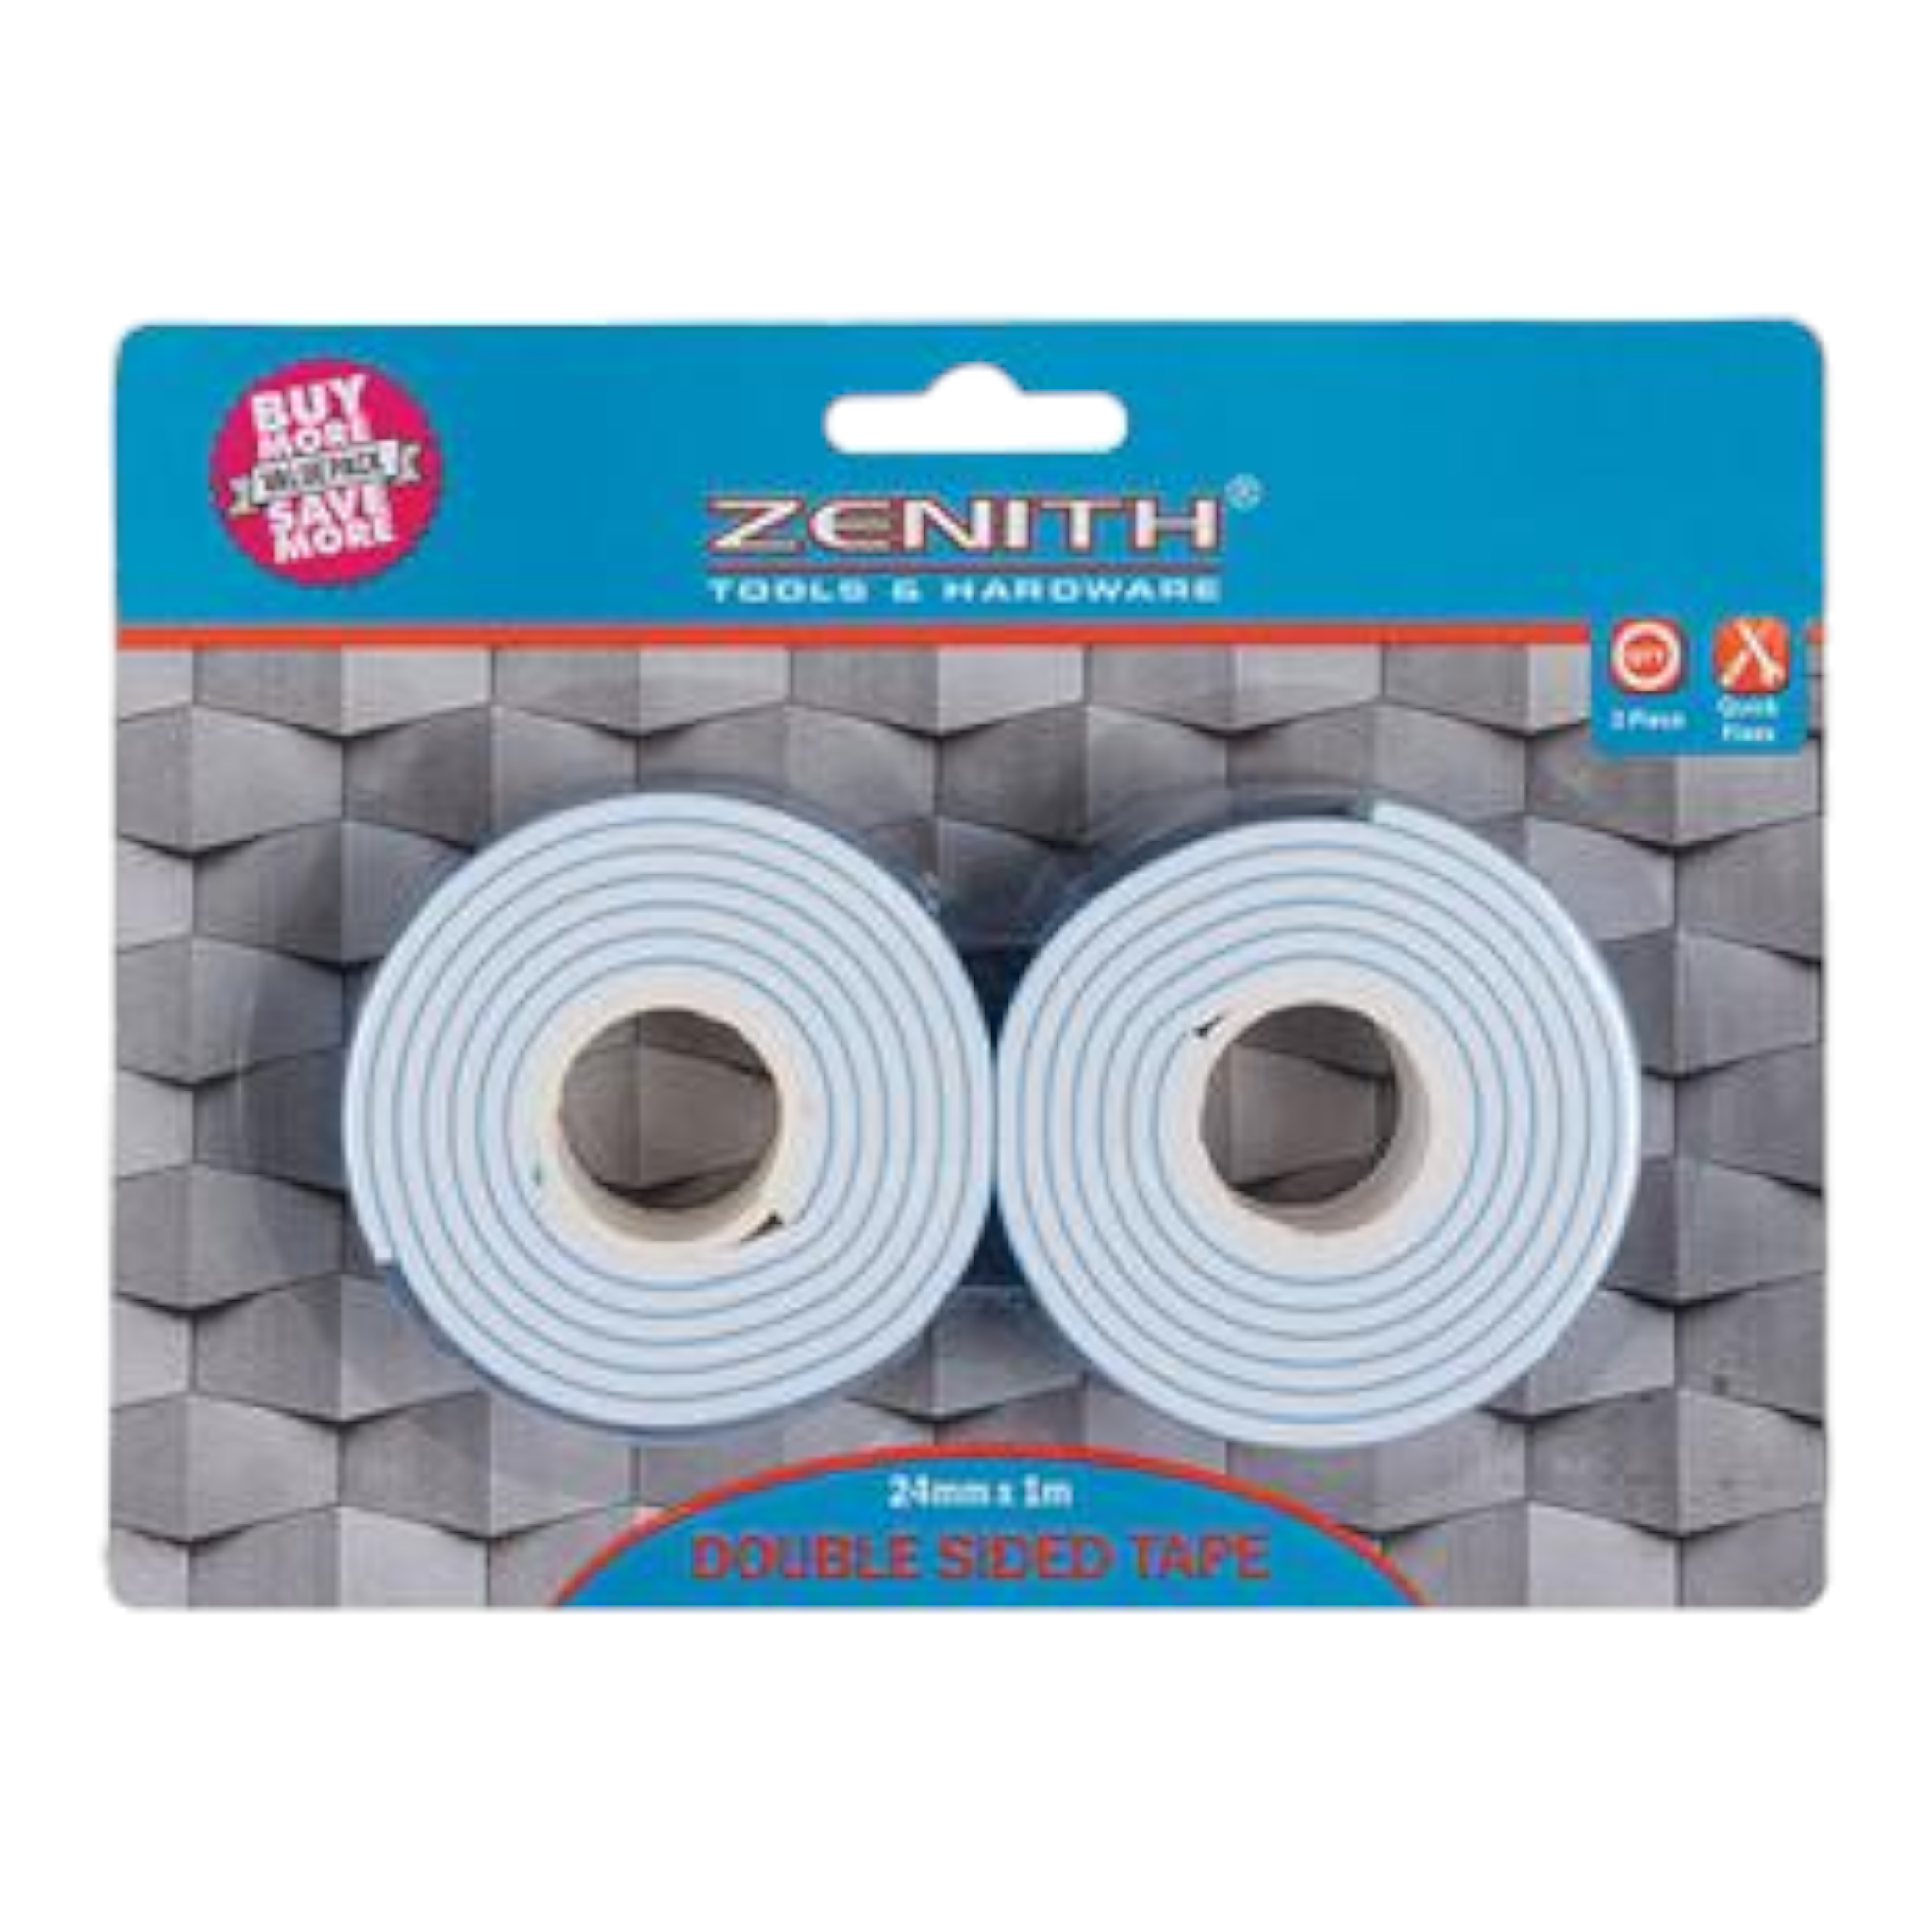 Zenith Tape Double Sided 24x1000mm 2pack